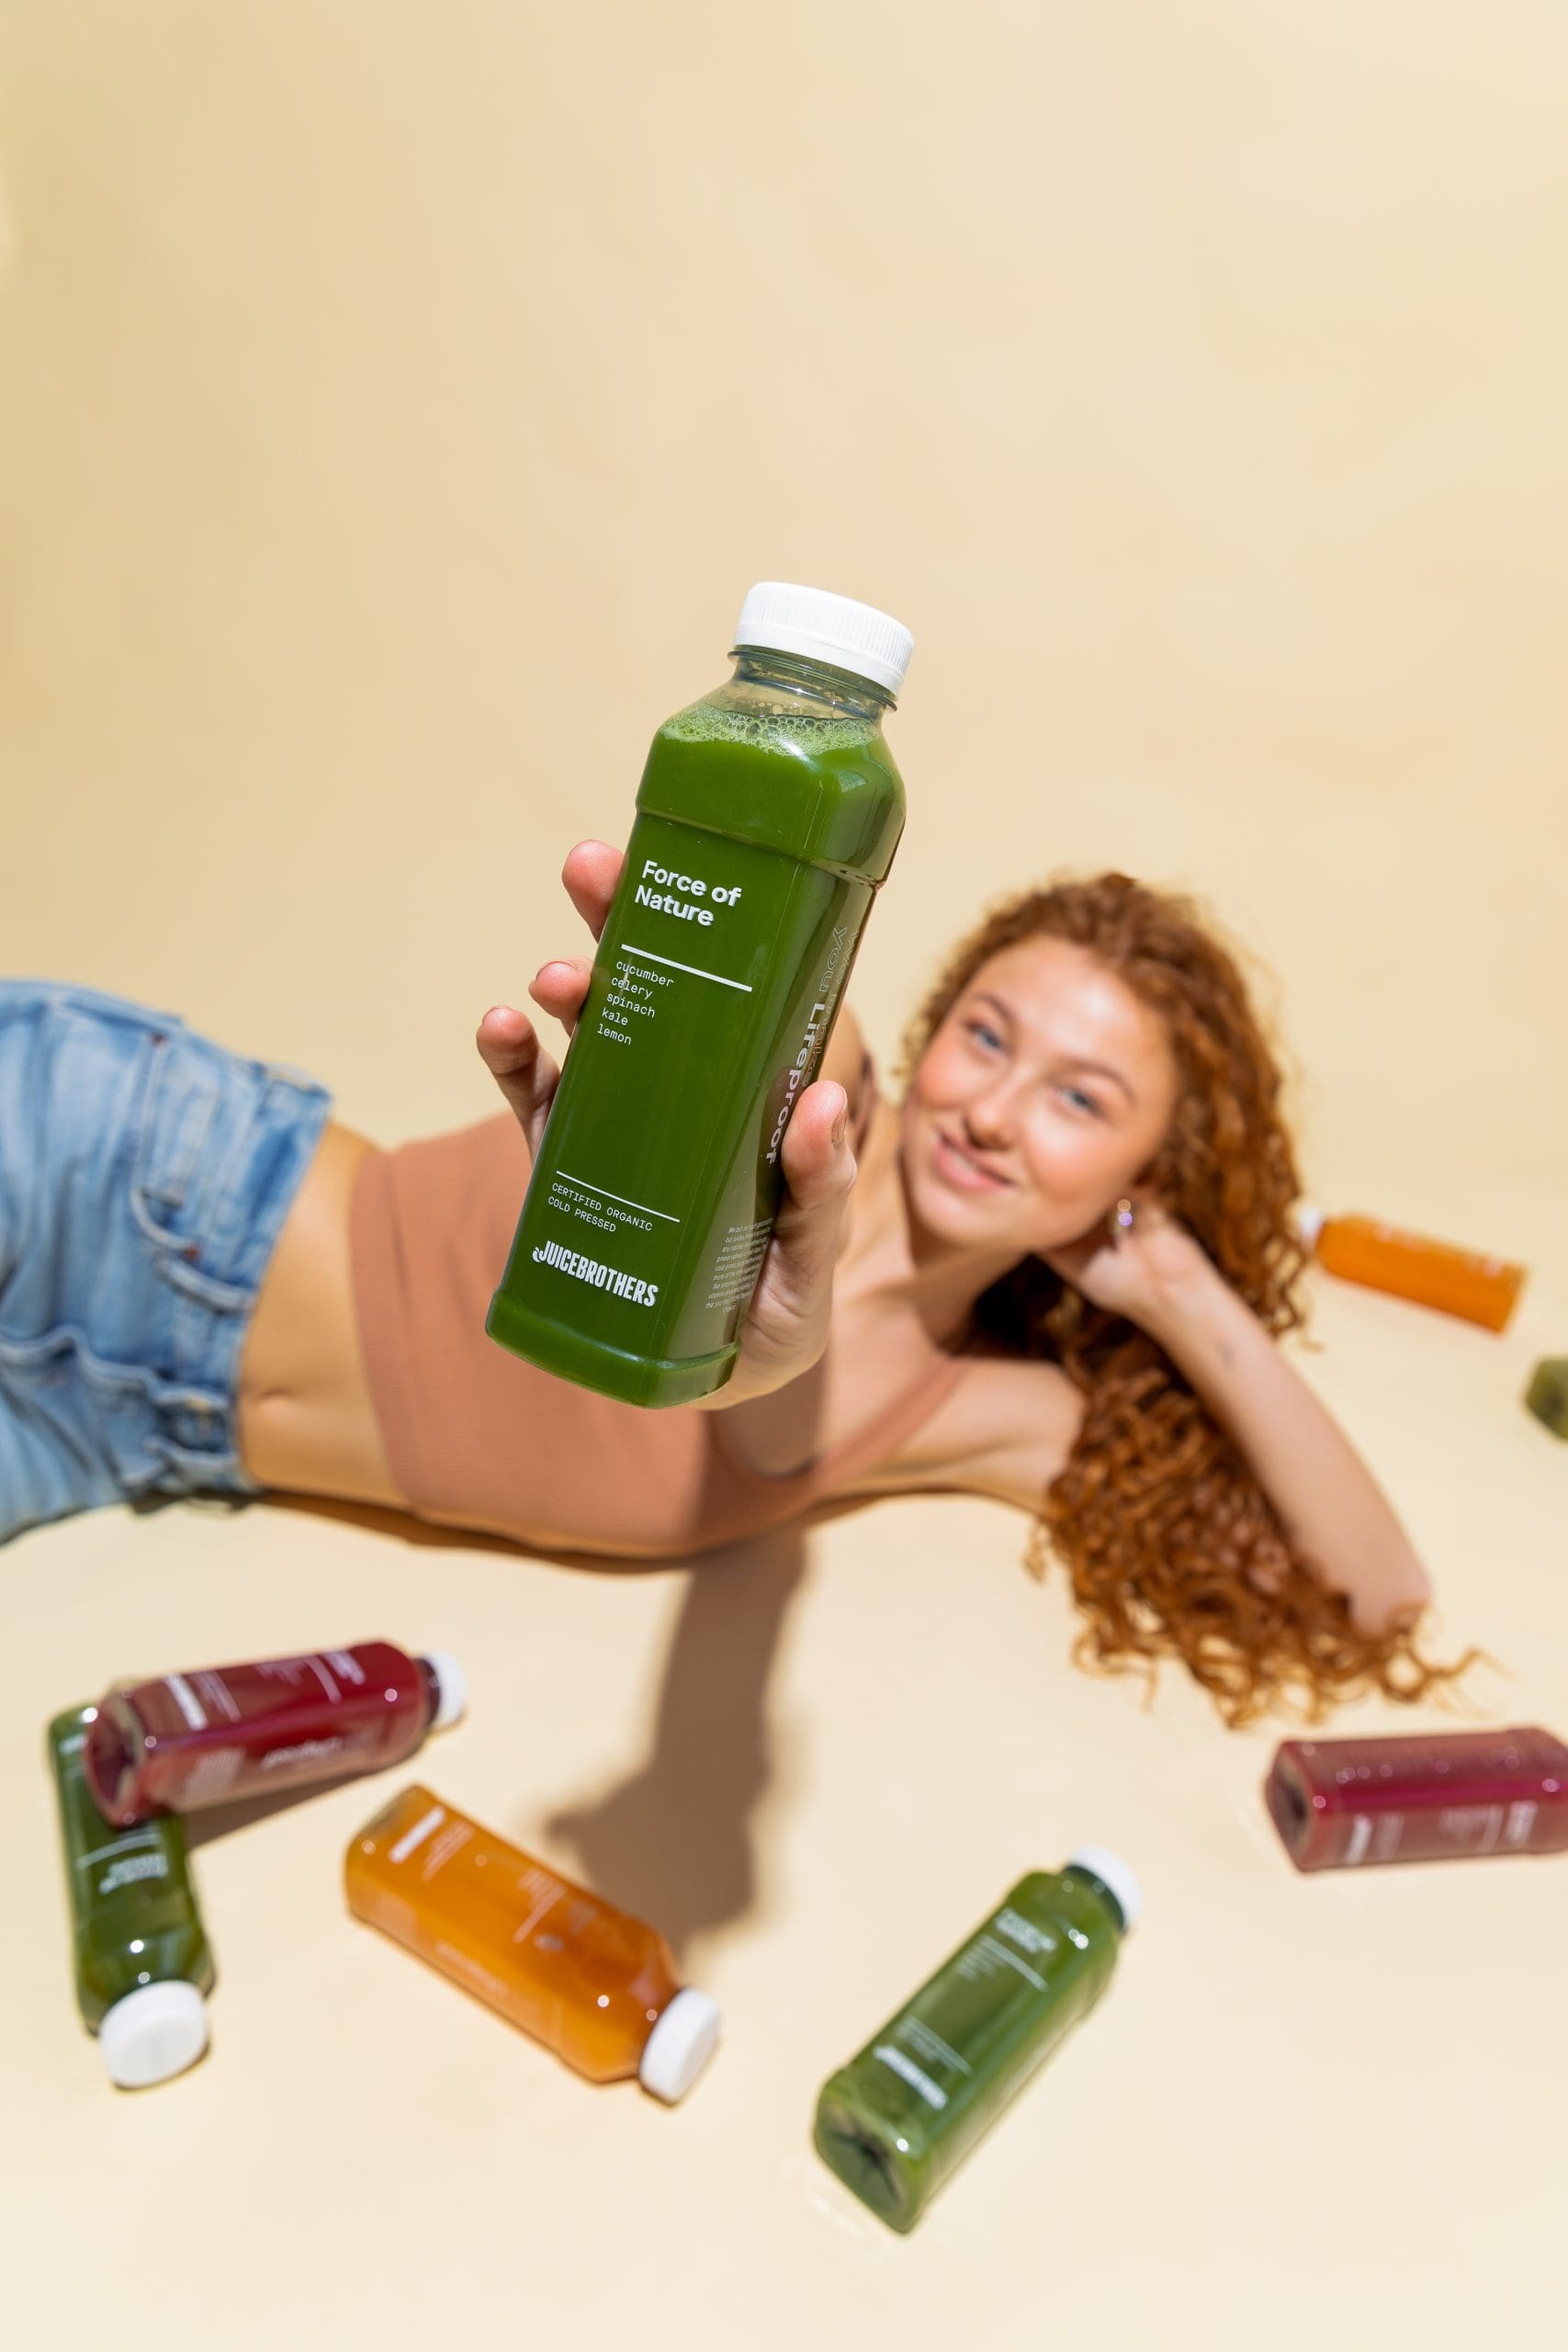 Juice cleanse juicebrothers detox cure with detox juices on the ground, vegetable juices and fruit juices of pure juice